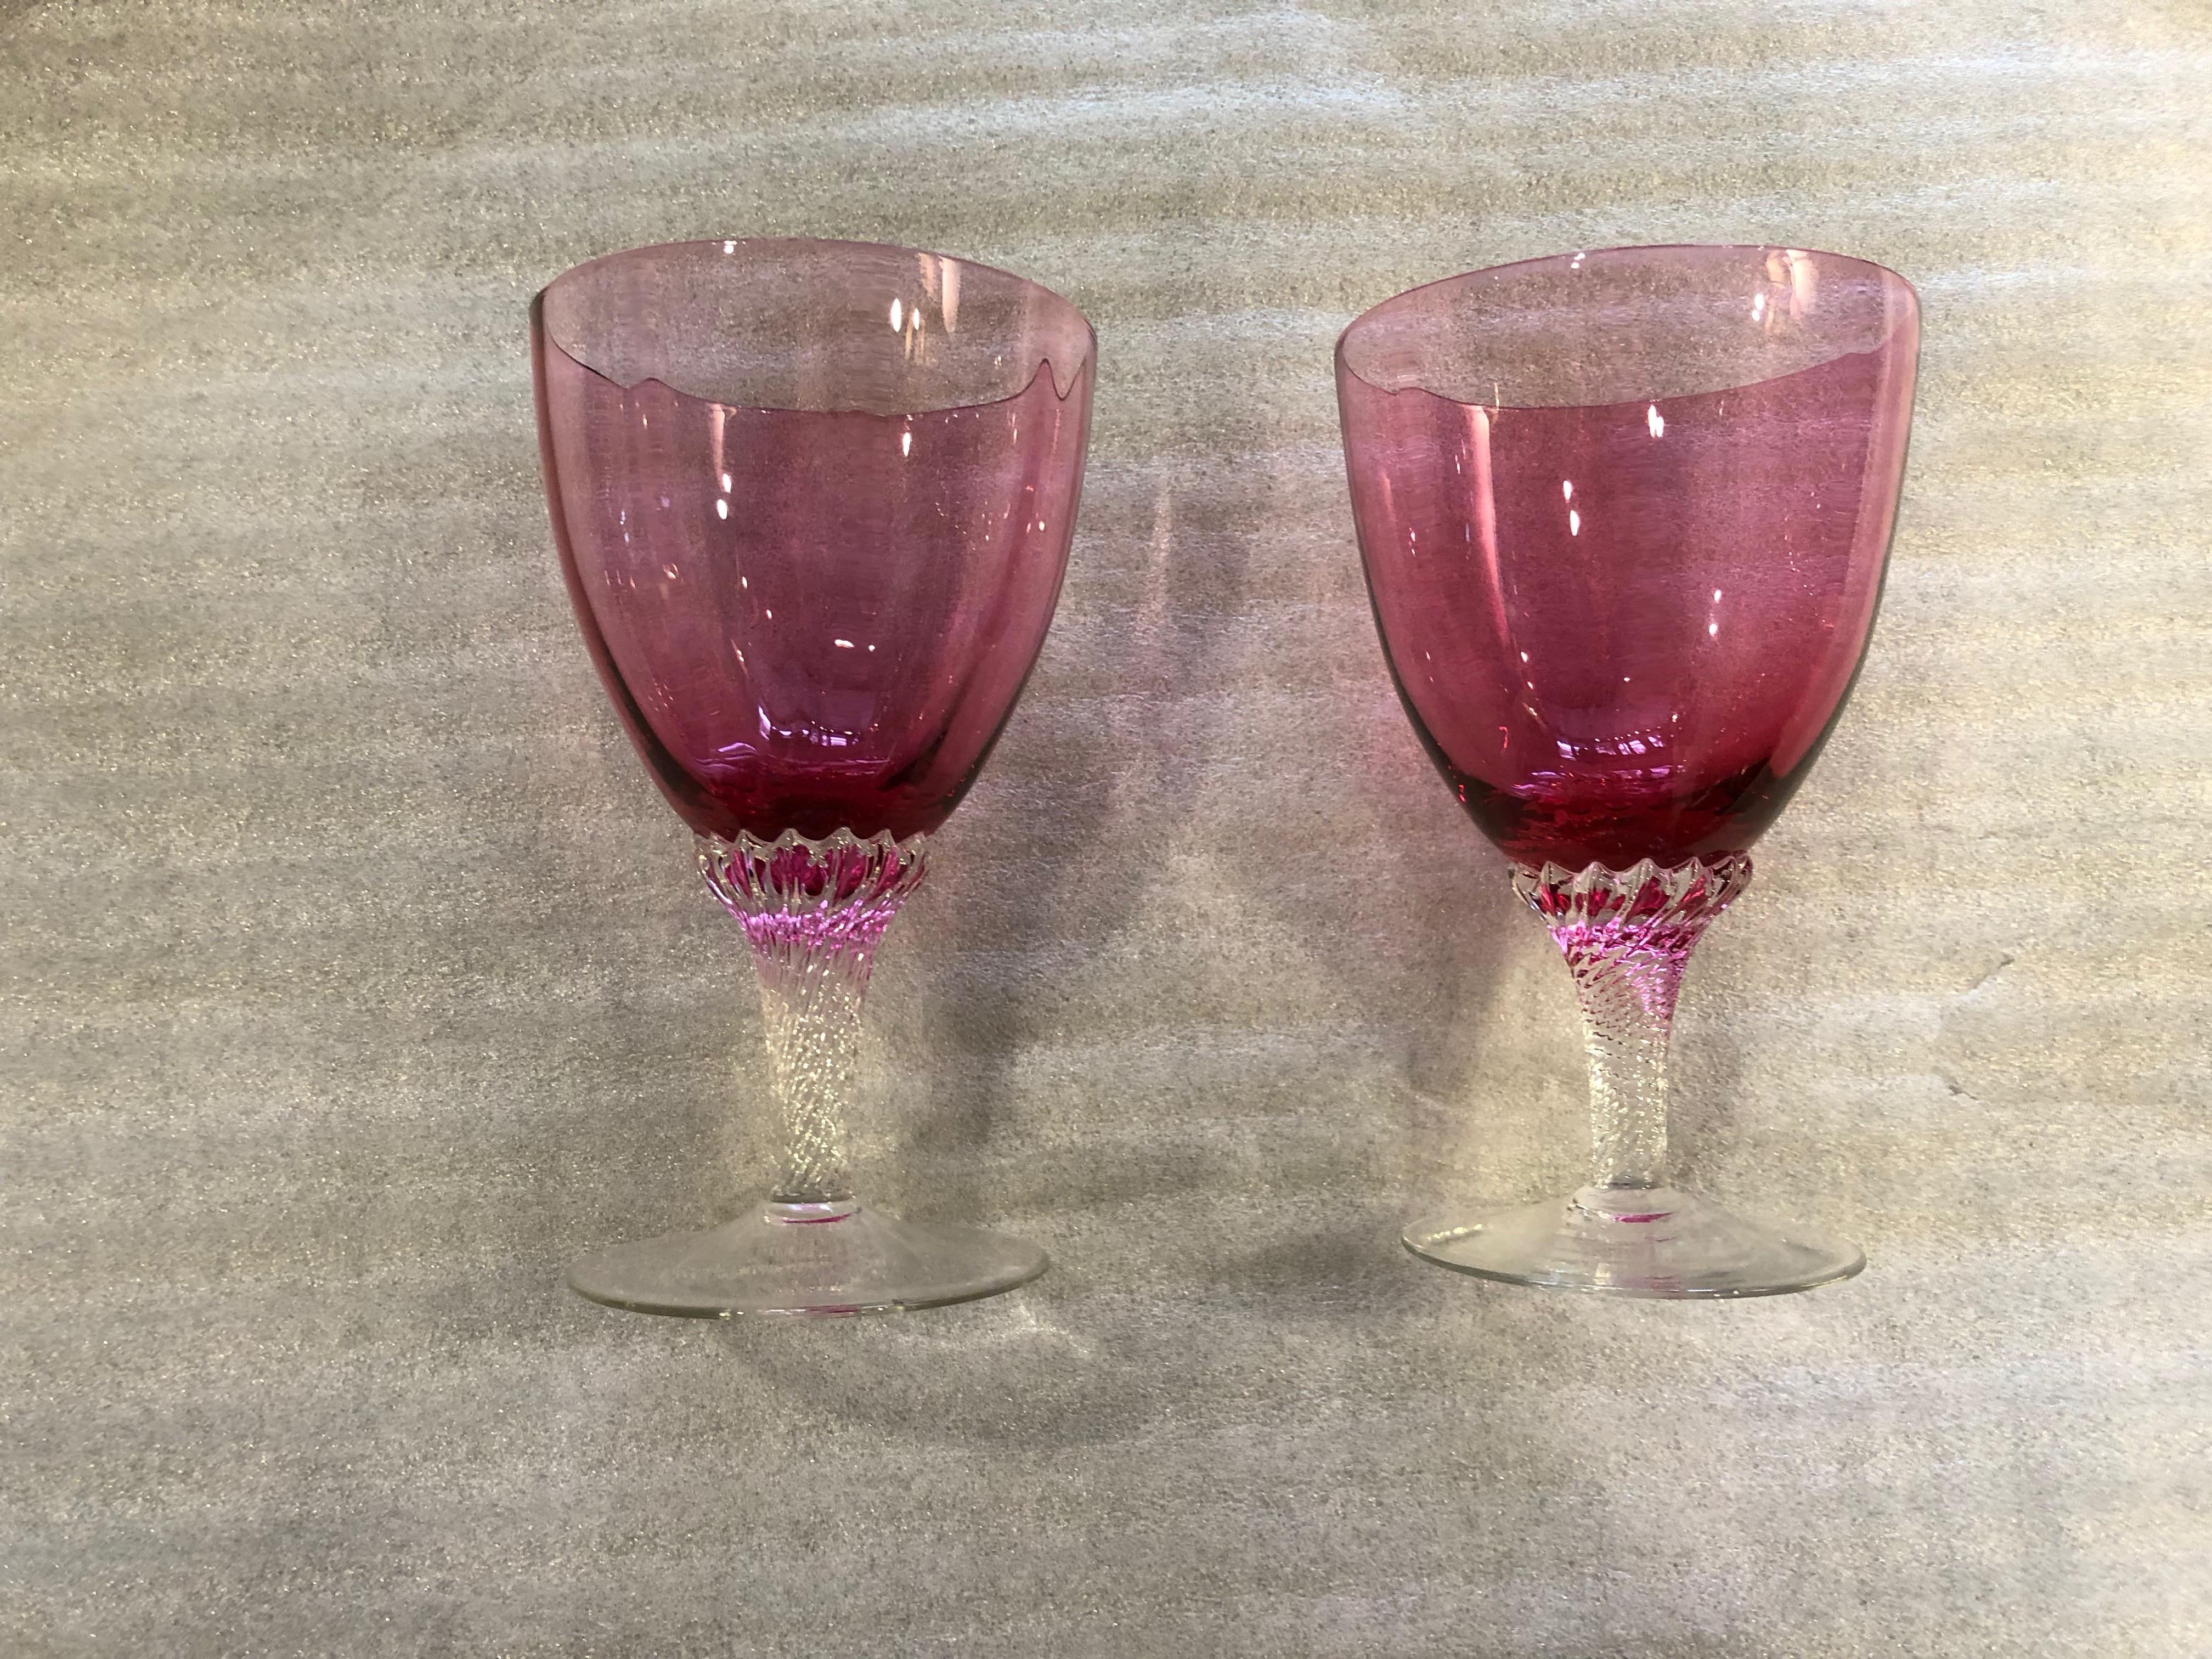 This set of cranberry glasses have a clear twisted stem.